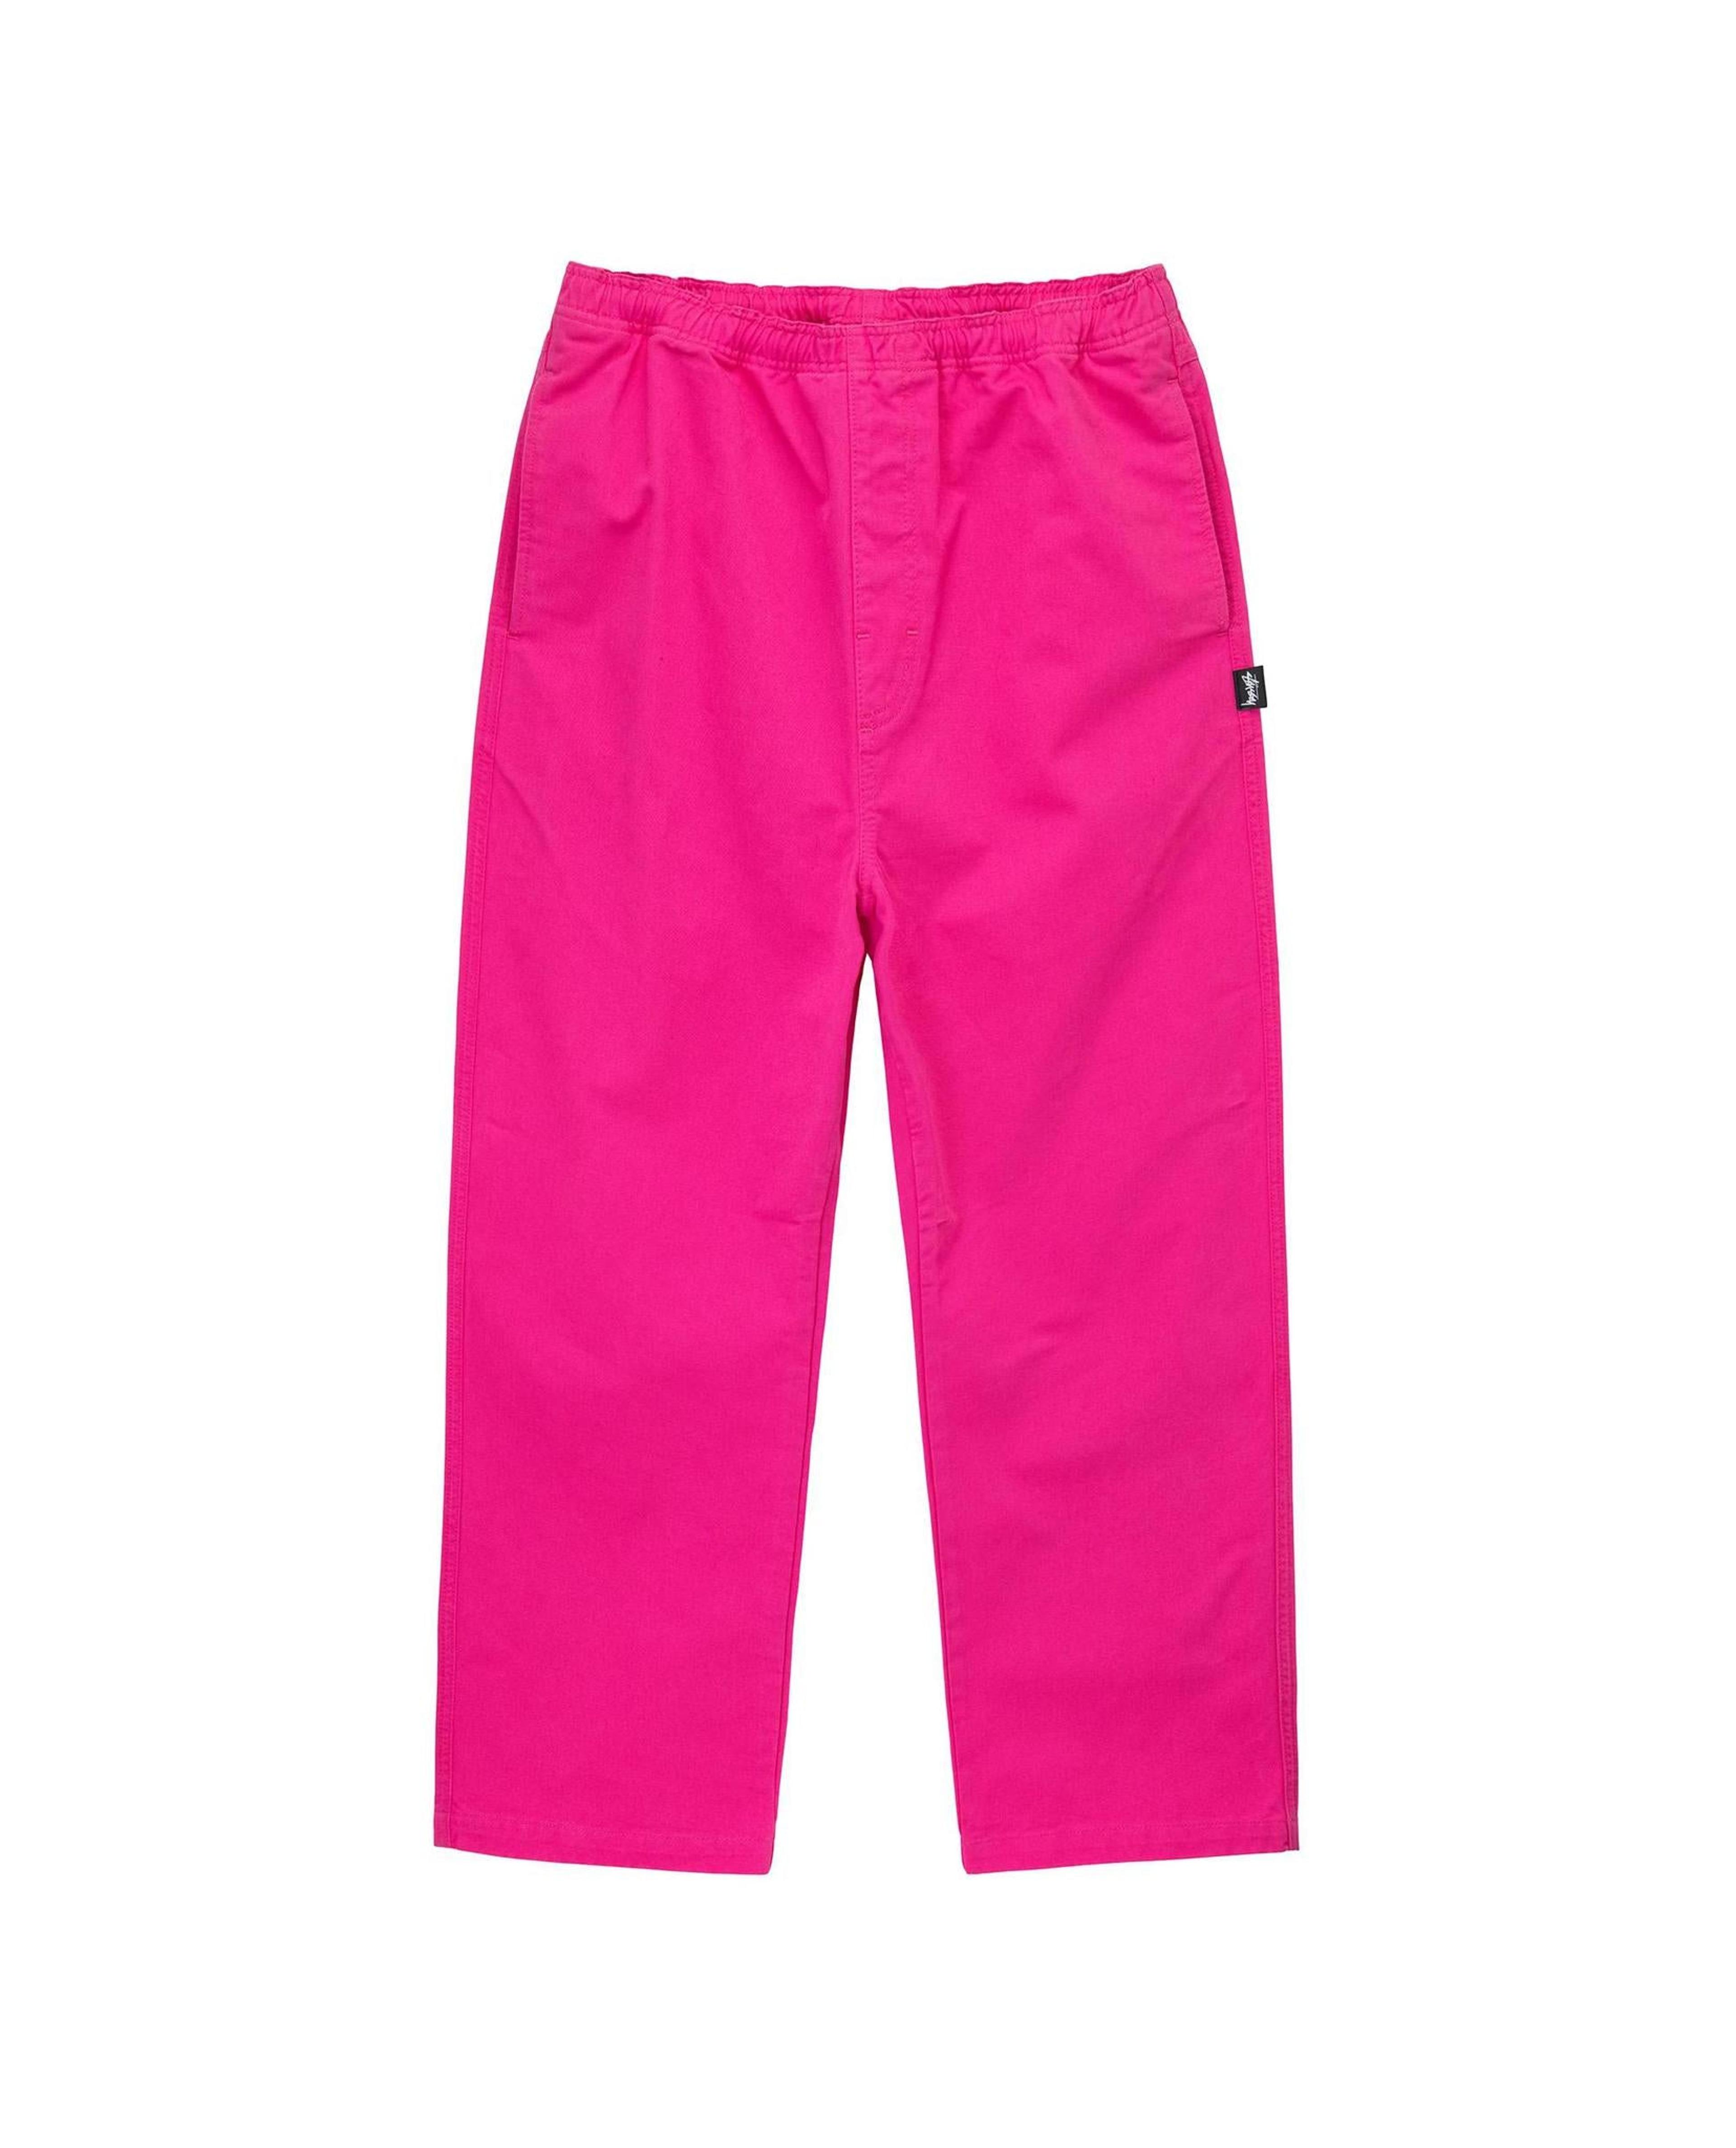 Alternate View 2 of Stussy Brushed Beach Pant